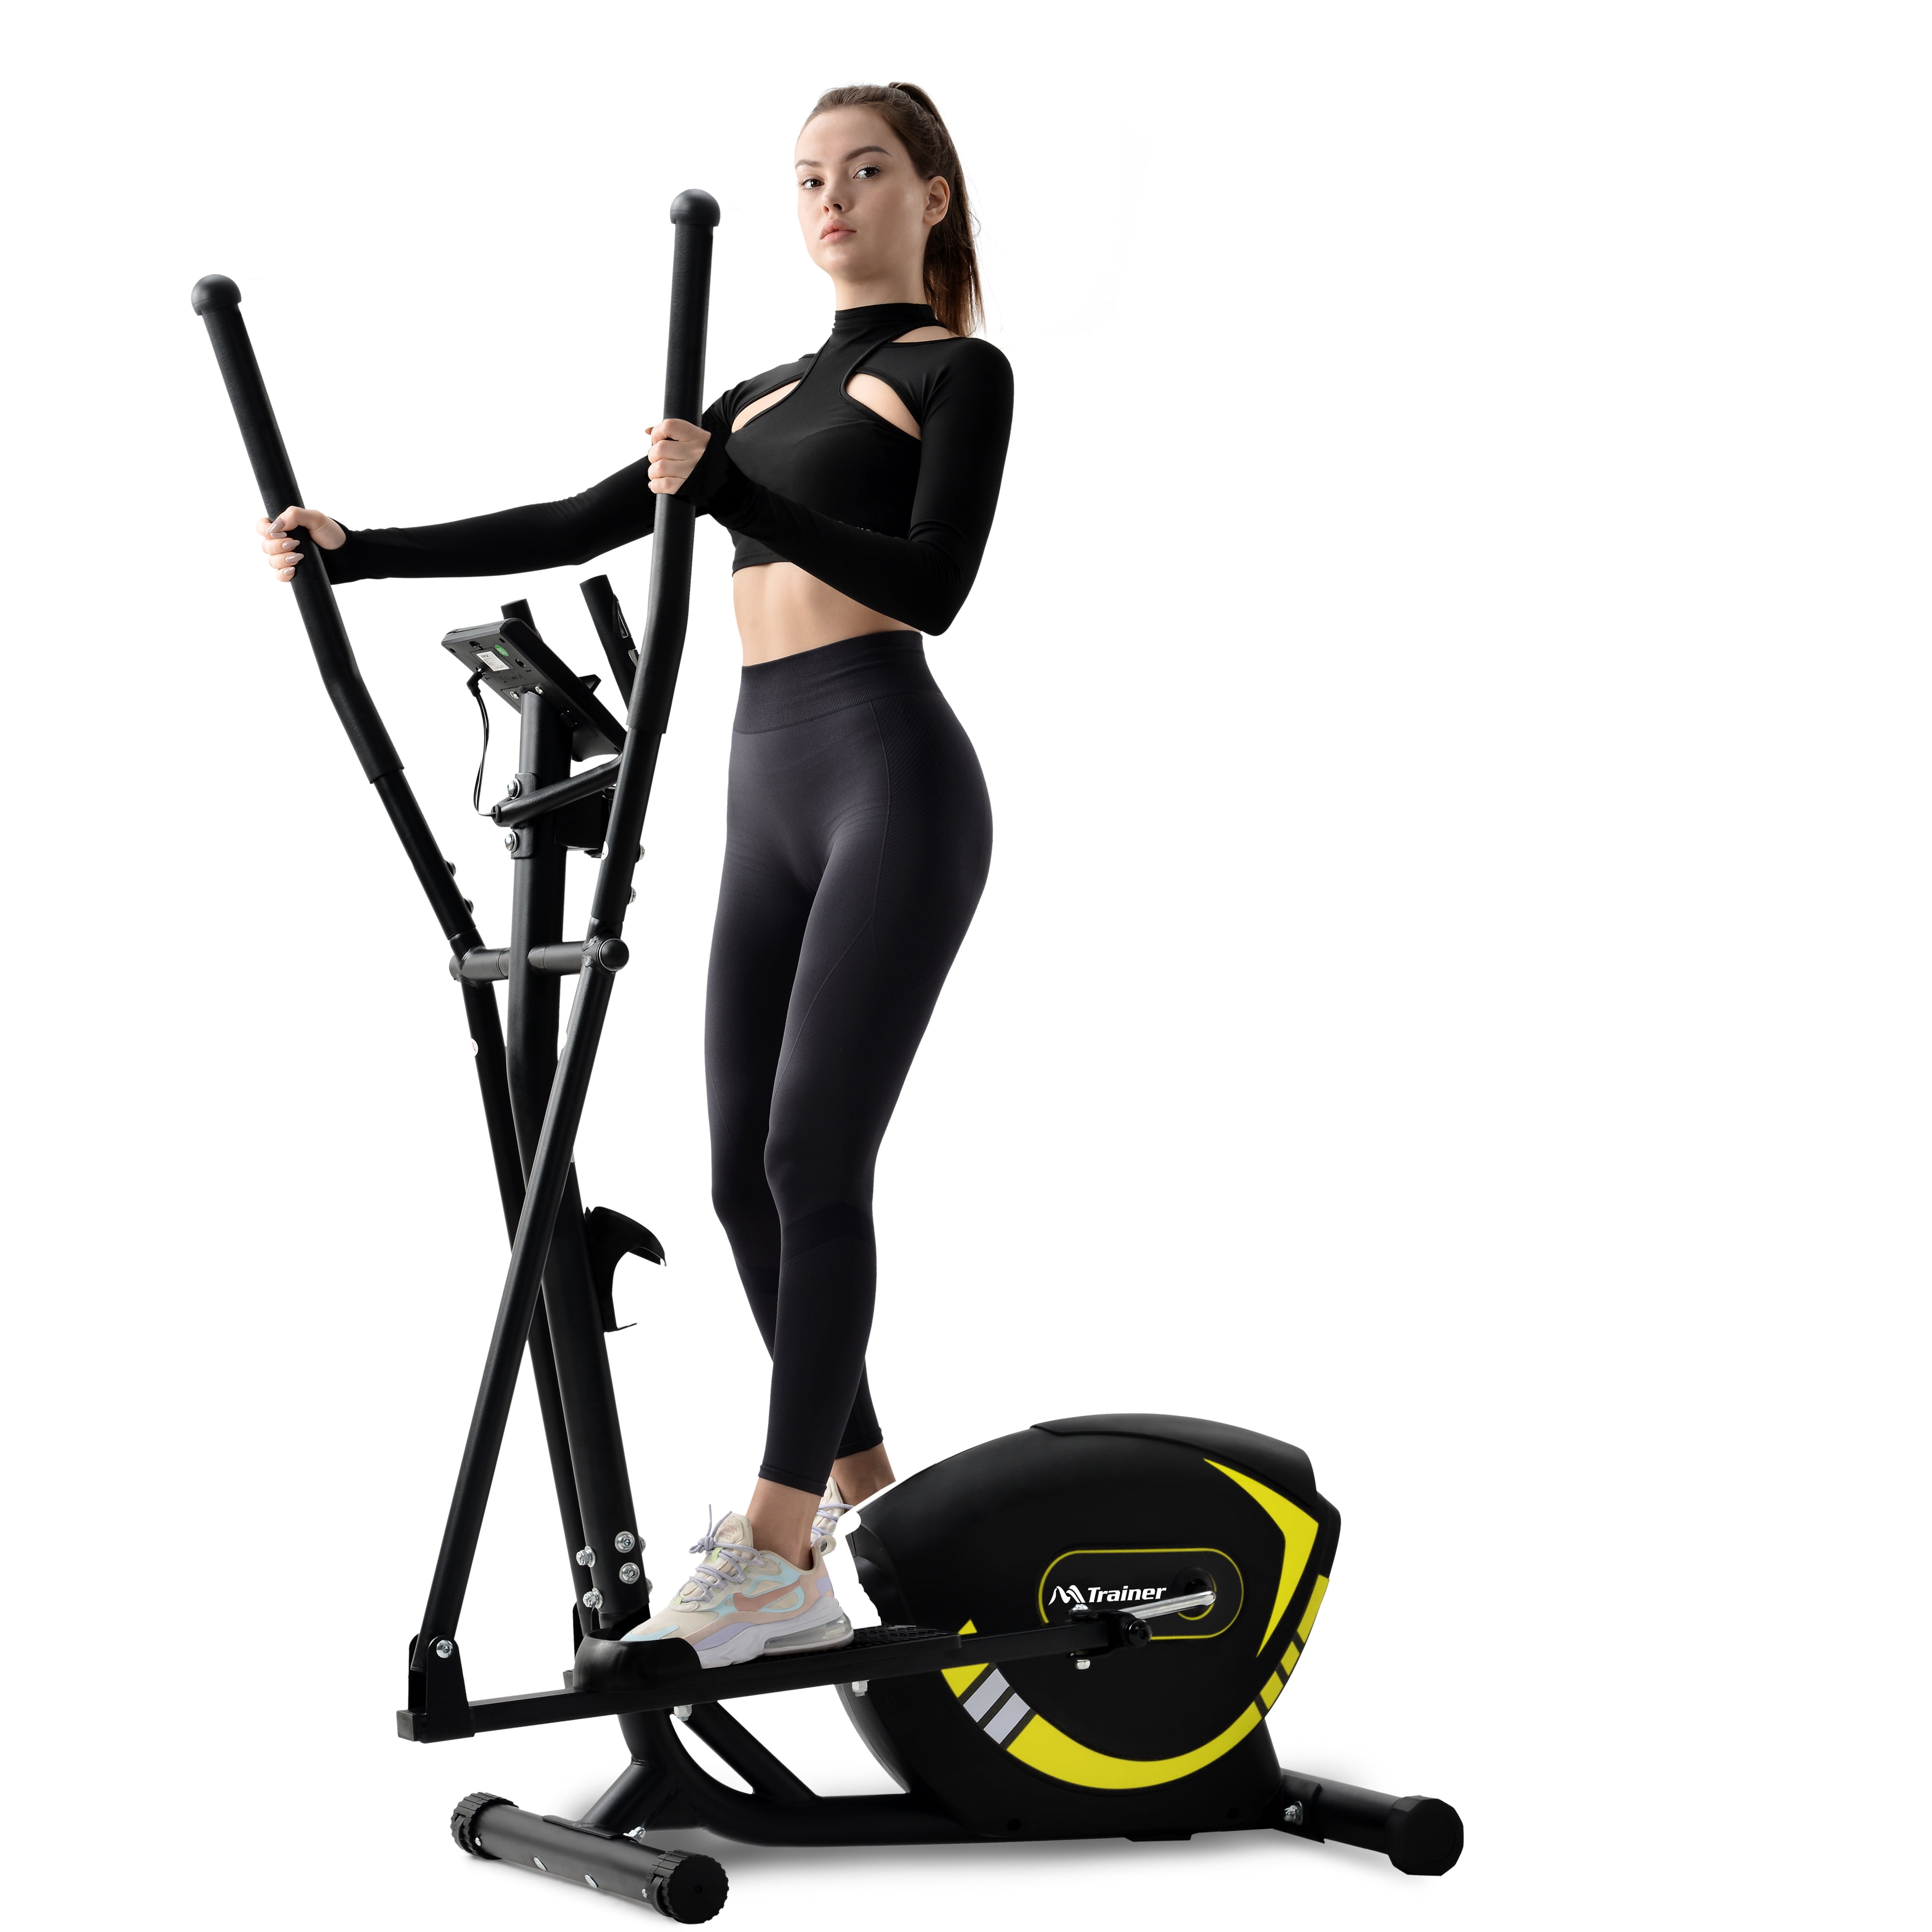 Mustard pooboo Elliptical Trainer Magnetic Elliptical Machines for Home Use Portable Elliptical Trainer with Pulse Rate and LCD Monitor 